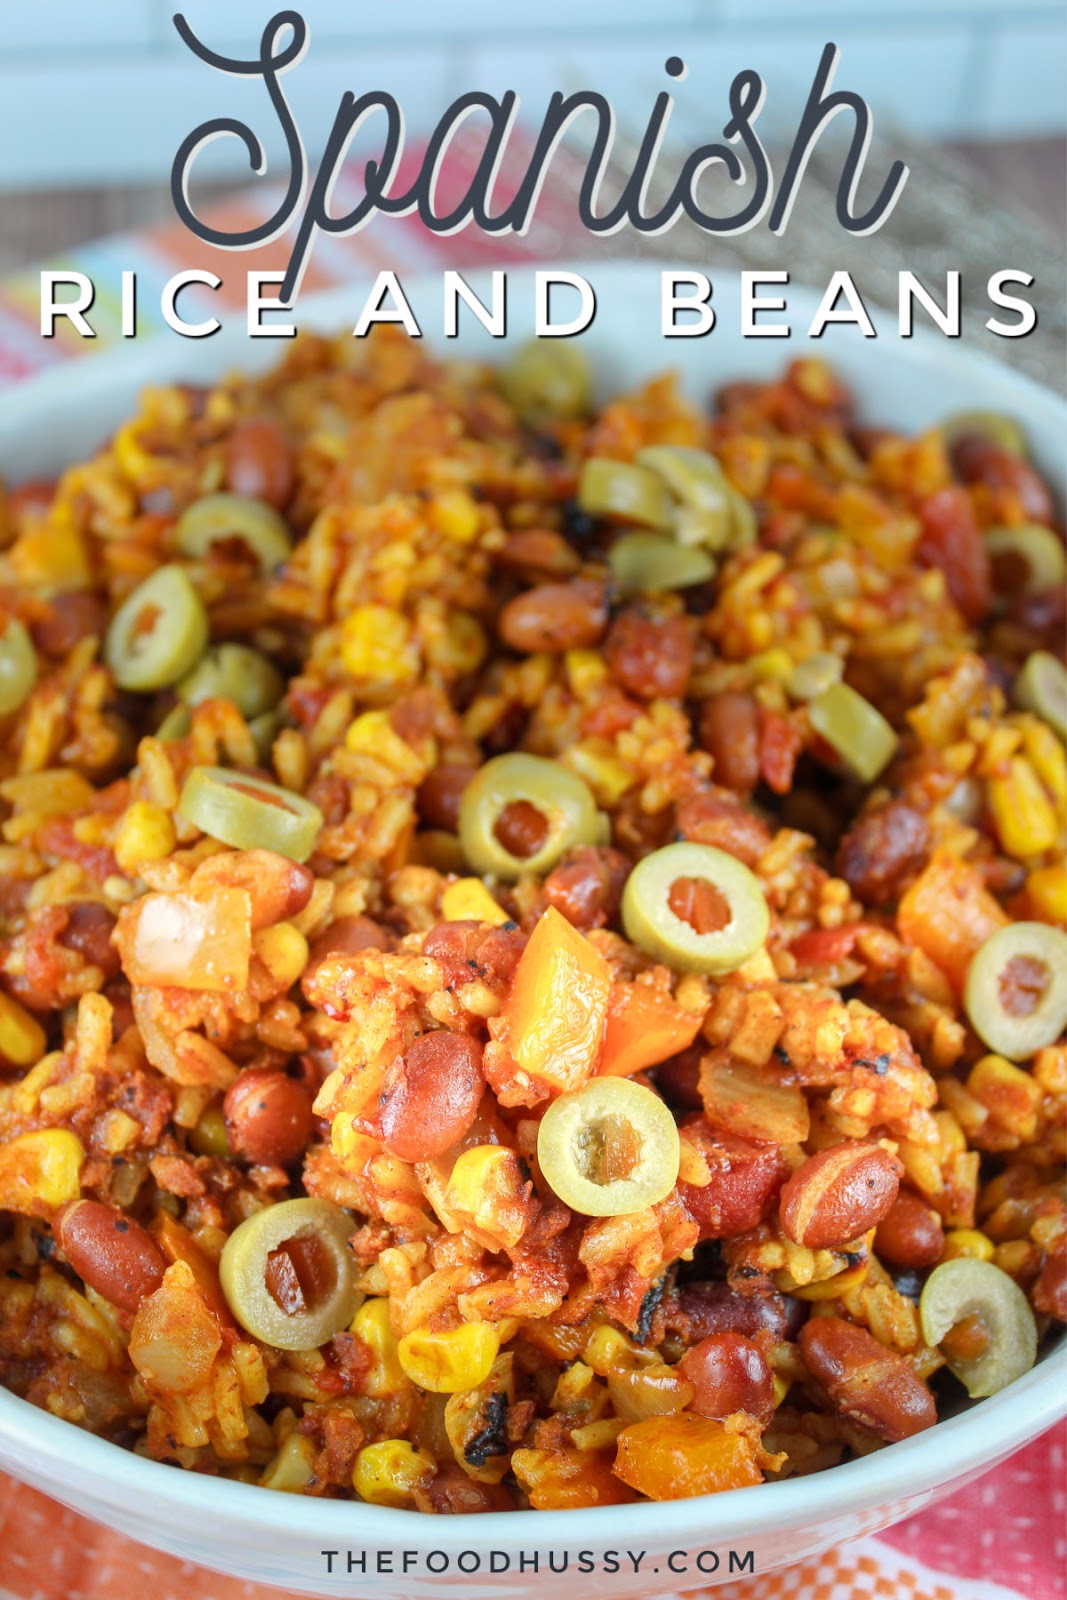 Spanish Rice and Beans is such a delicious meal and you can really customize it to your family’s tastes. I love mine with peppers, onions and lots of flavor! (garlic, cumin, paprika and more!)
 via @foodhussy